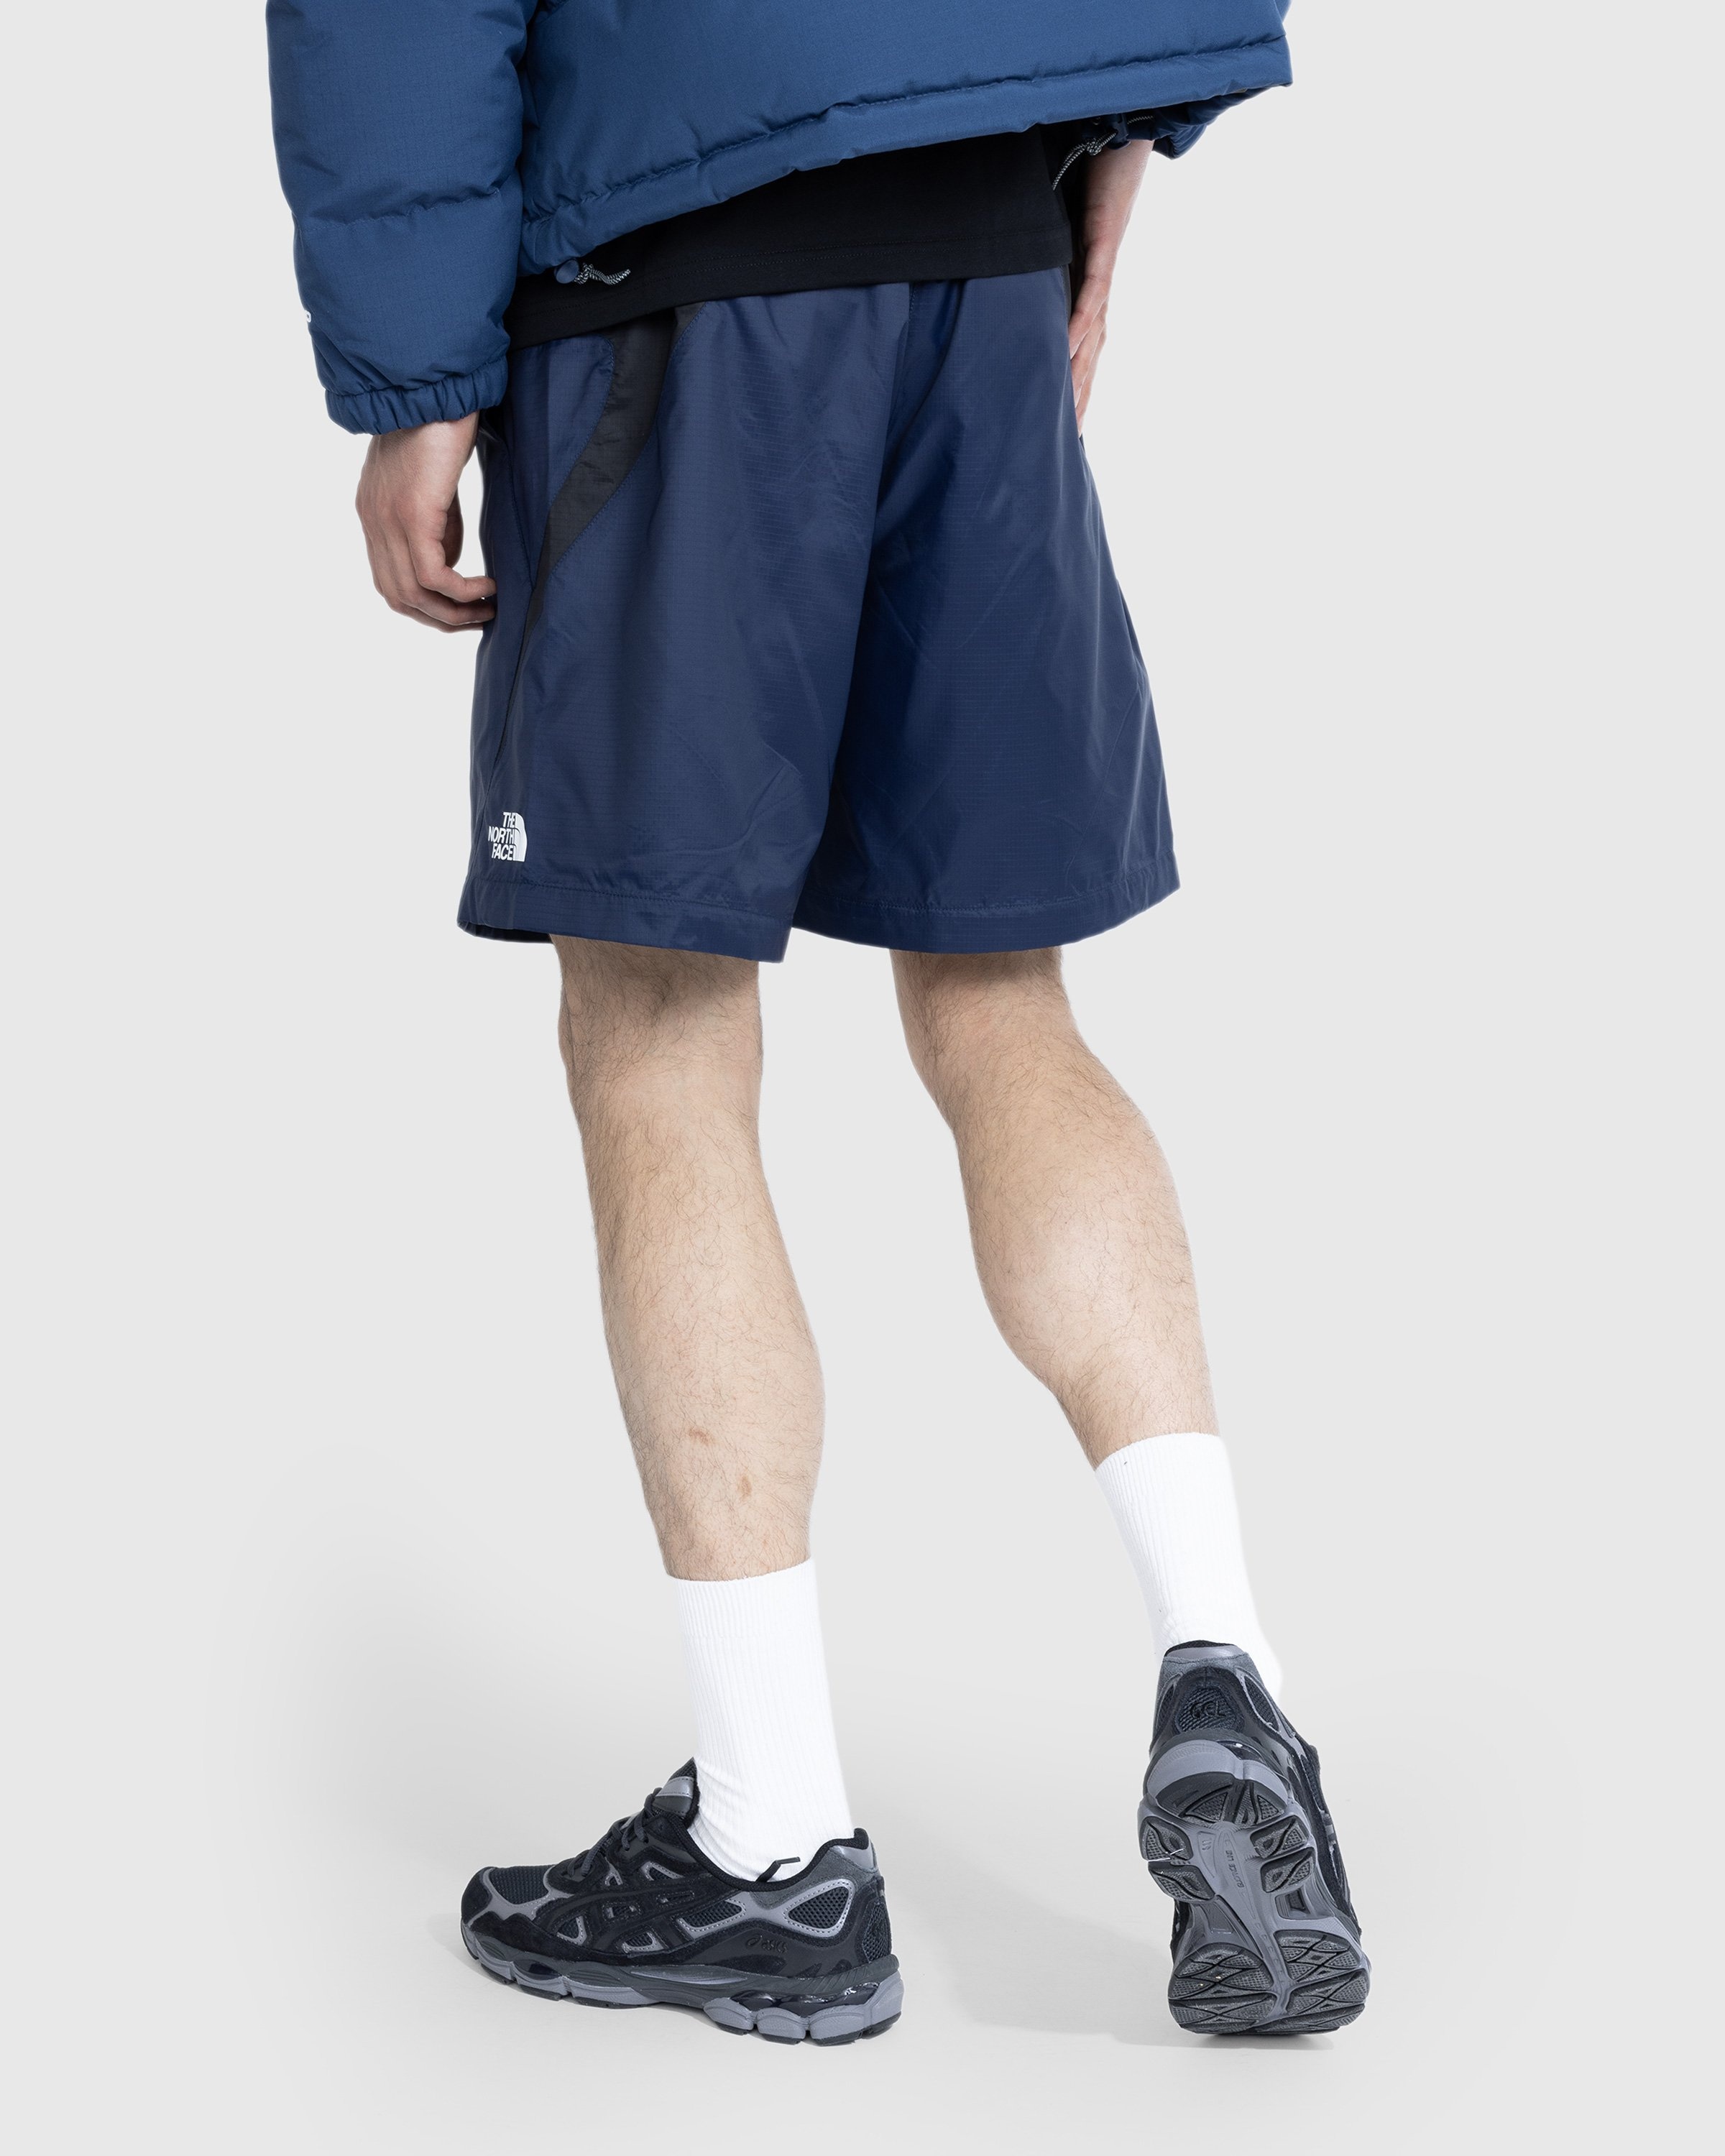 The North Face – TNF X Shorts Blue - Shorts - Blue - Image 3